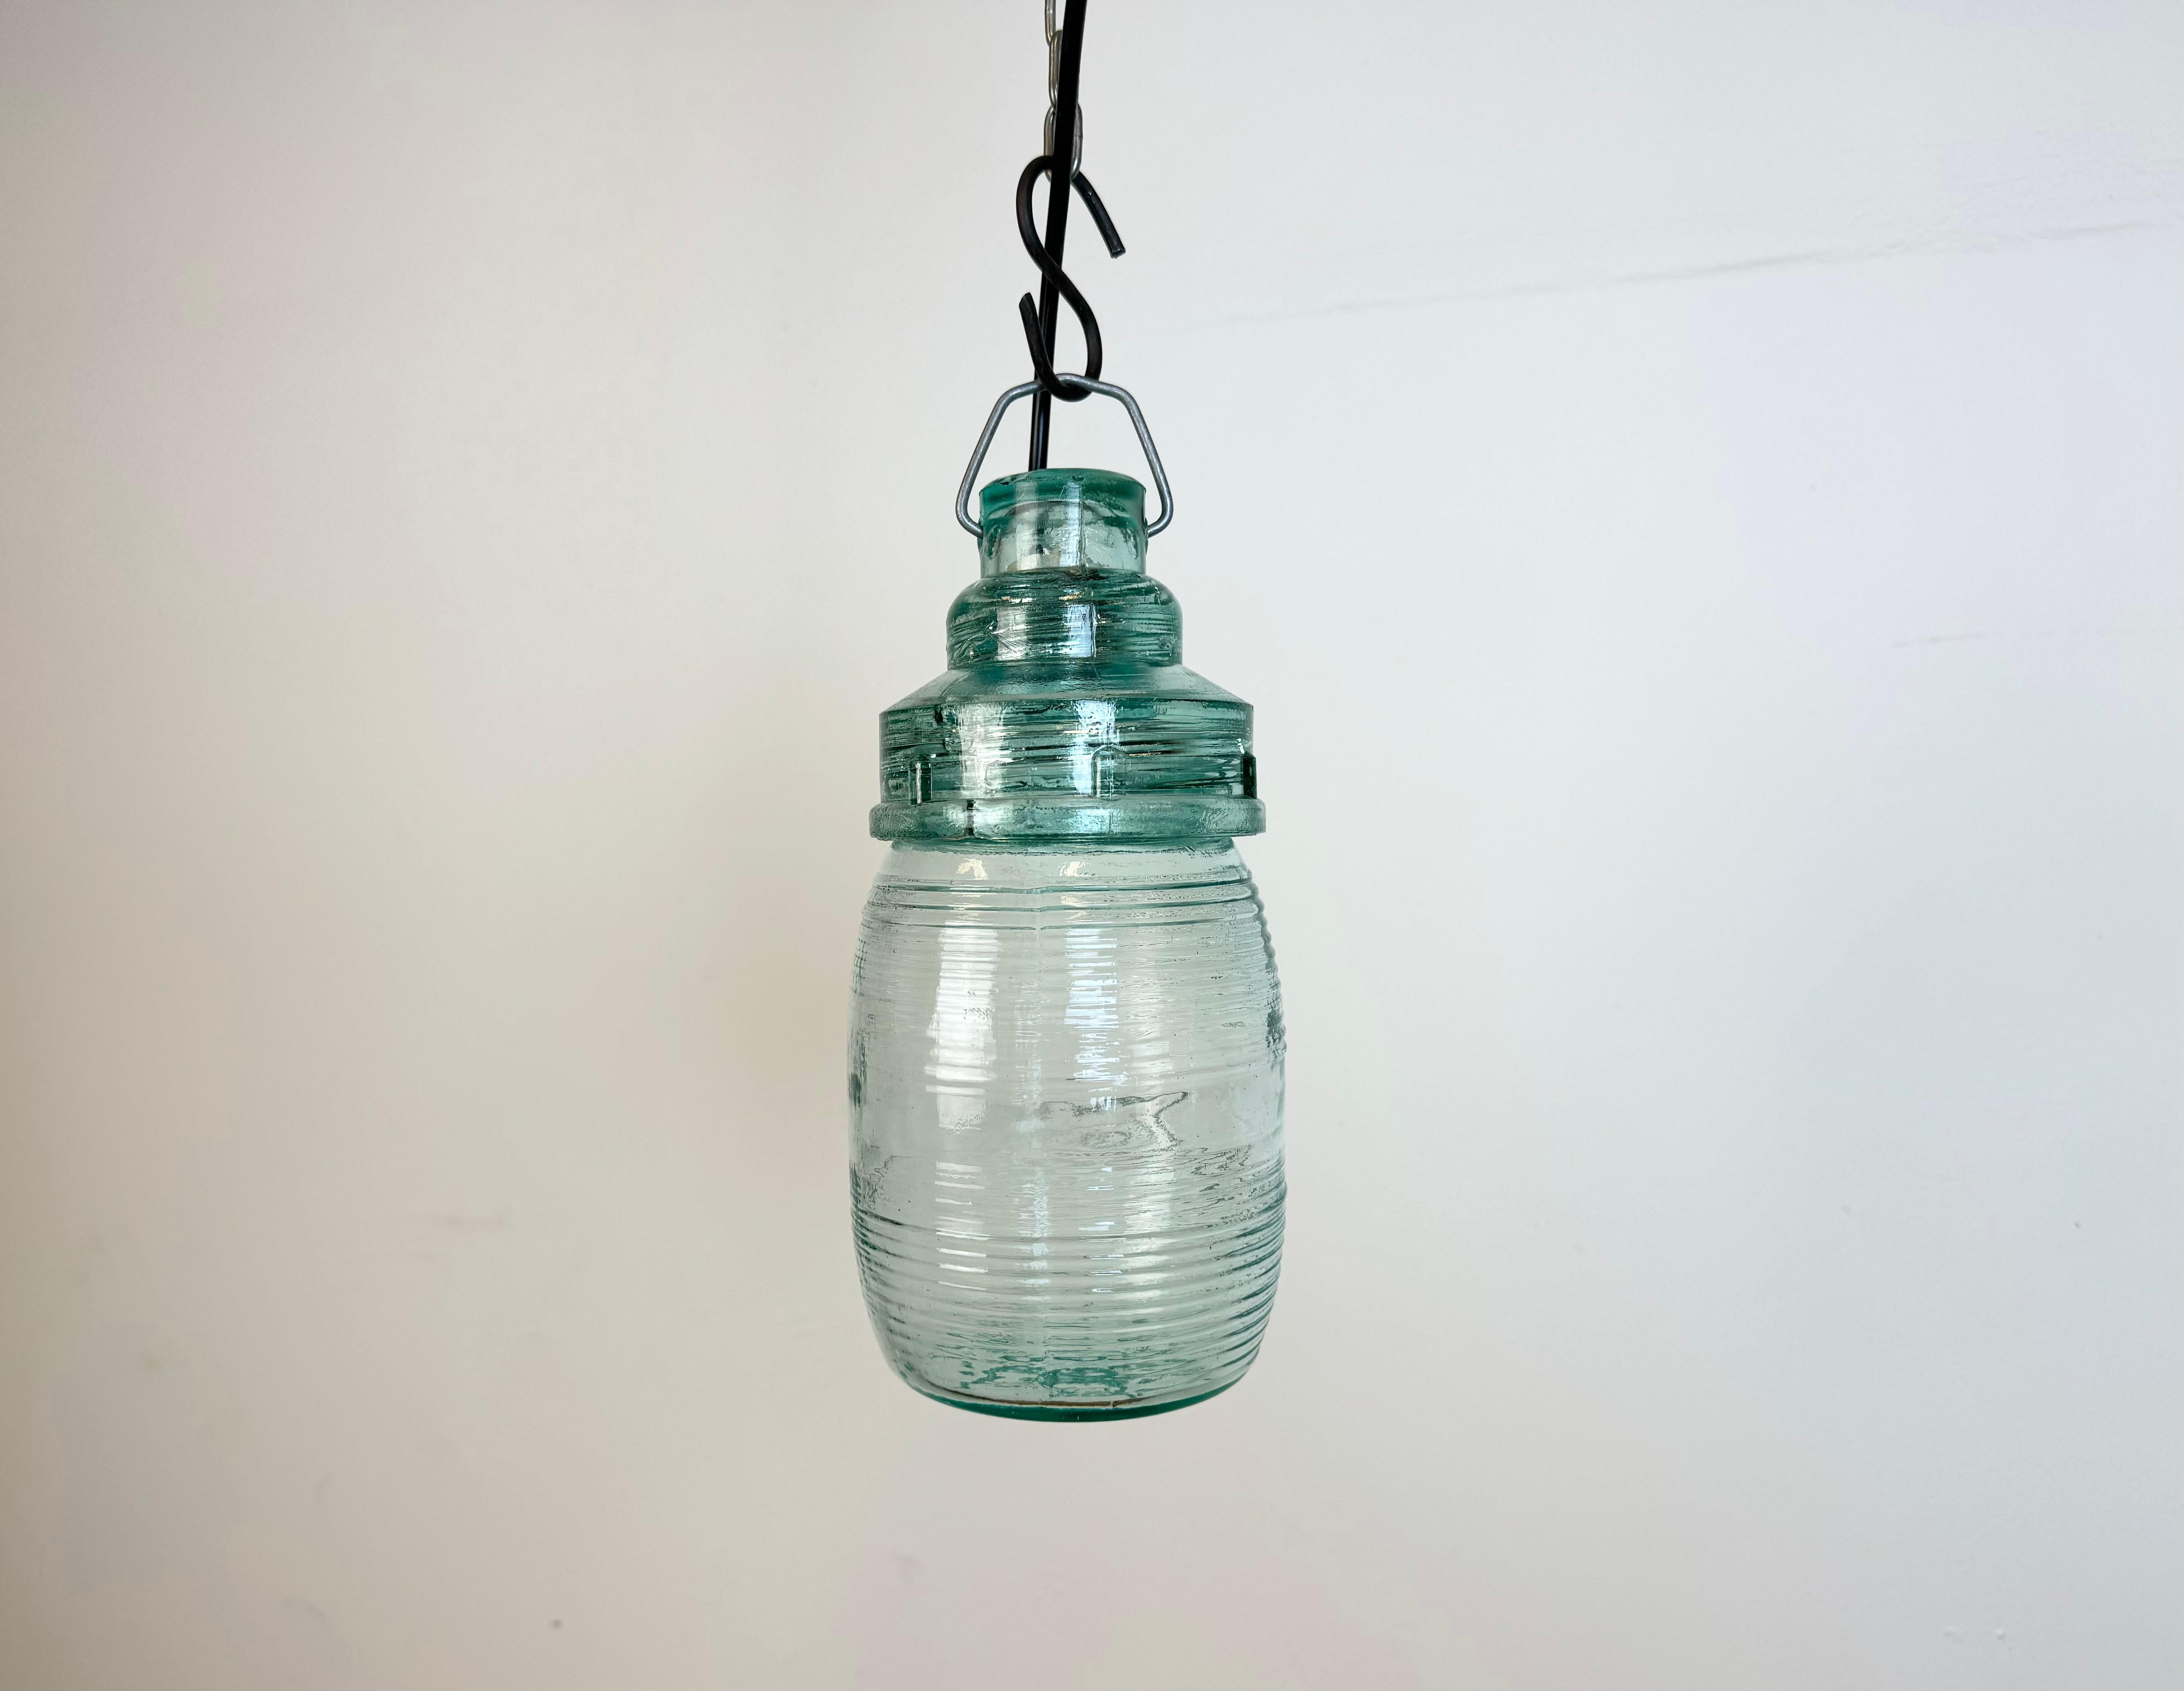 Vintage industrial completely glass light made in Ukraine in former Soviet Union during the 1960s. The socket requires E27/ E26 light bulbs. New wire. The weight of the light is 0,9 kg.